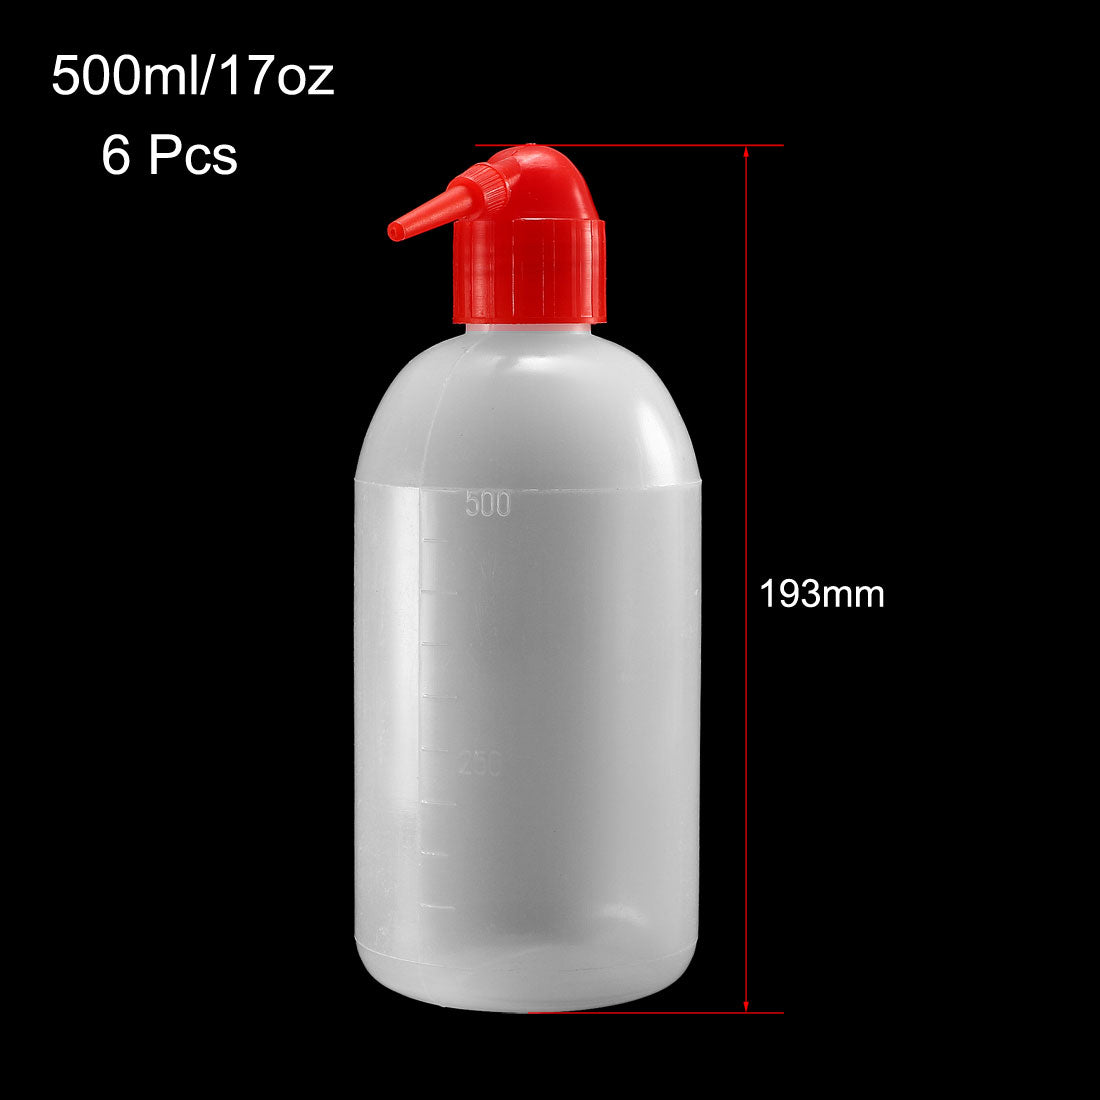 uxcell Uxcell Plastic Wash Bottle Squeeze Bottle 500ml/17oz Red Narrow Mouth Lab Tip Liquid Storage Watering Tools 6pcs